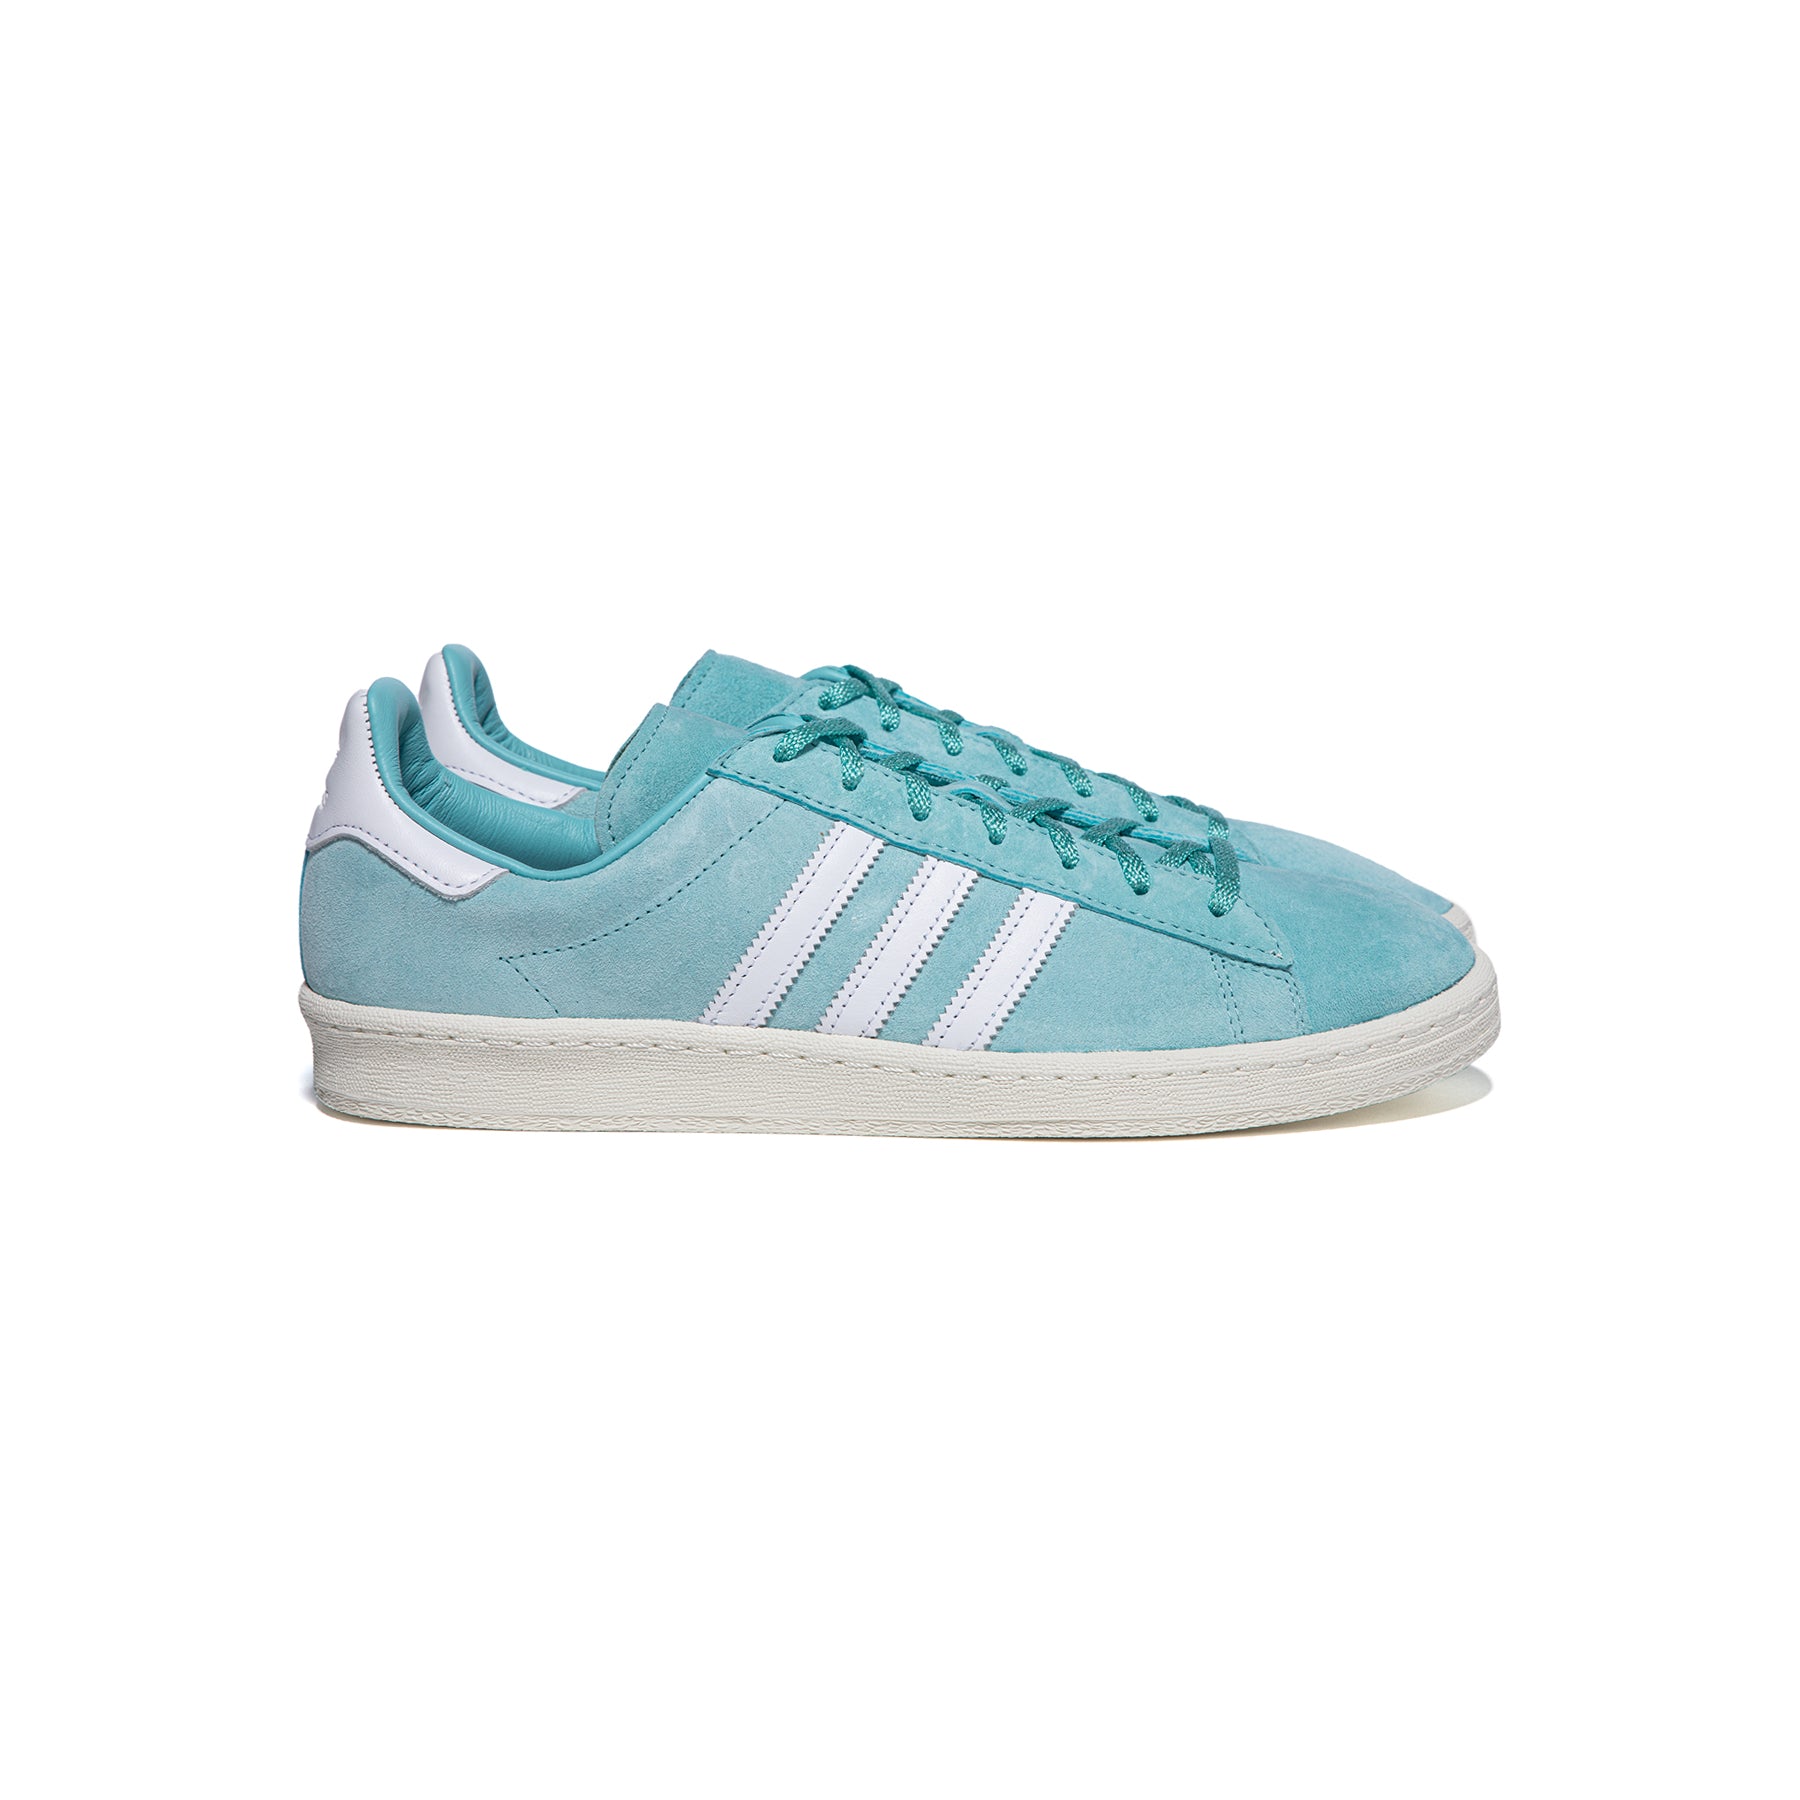 erven tweeling radicaal adidas Campus 80 (Easy Mint/Cloud White/Off White) – Concepts